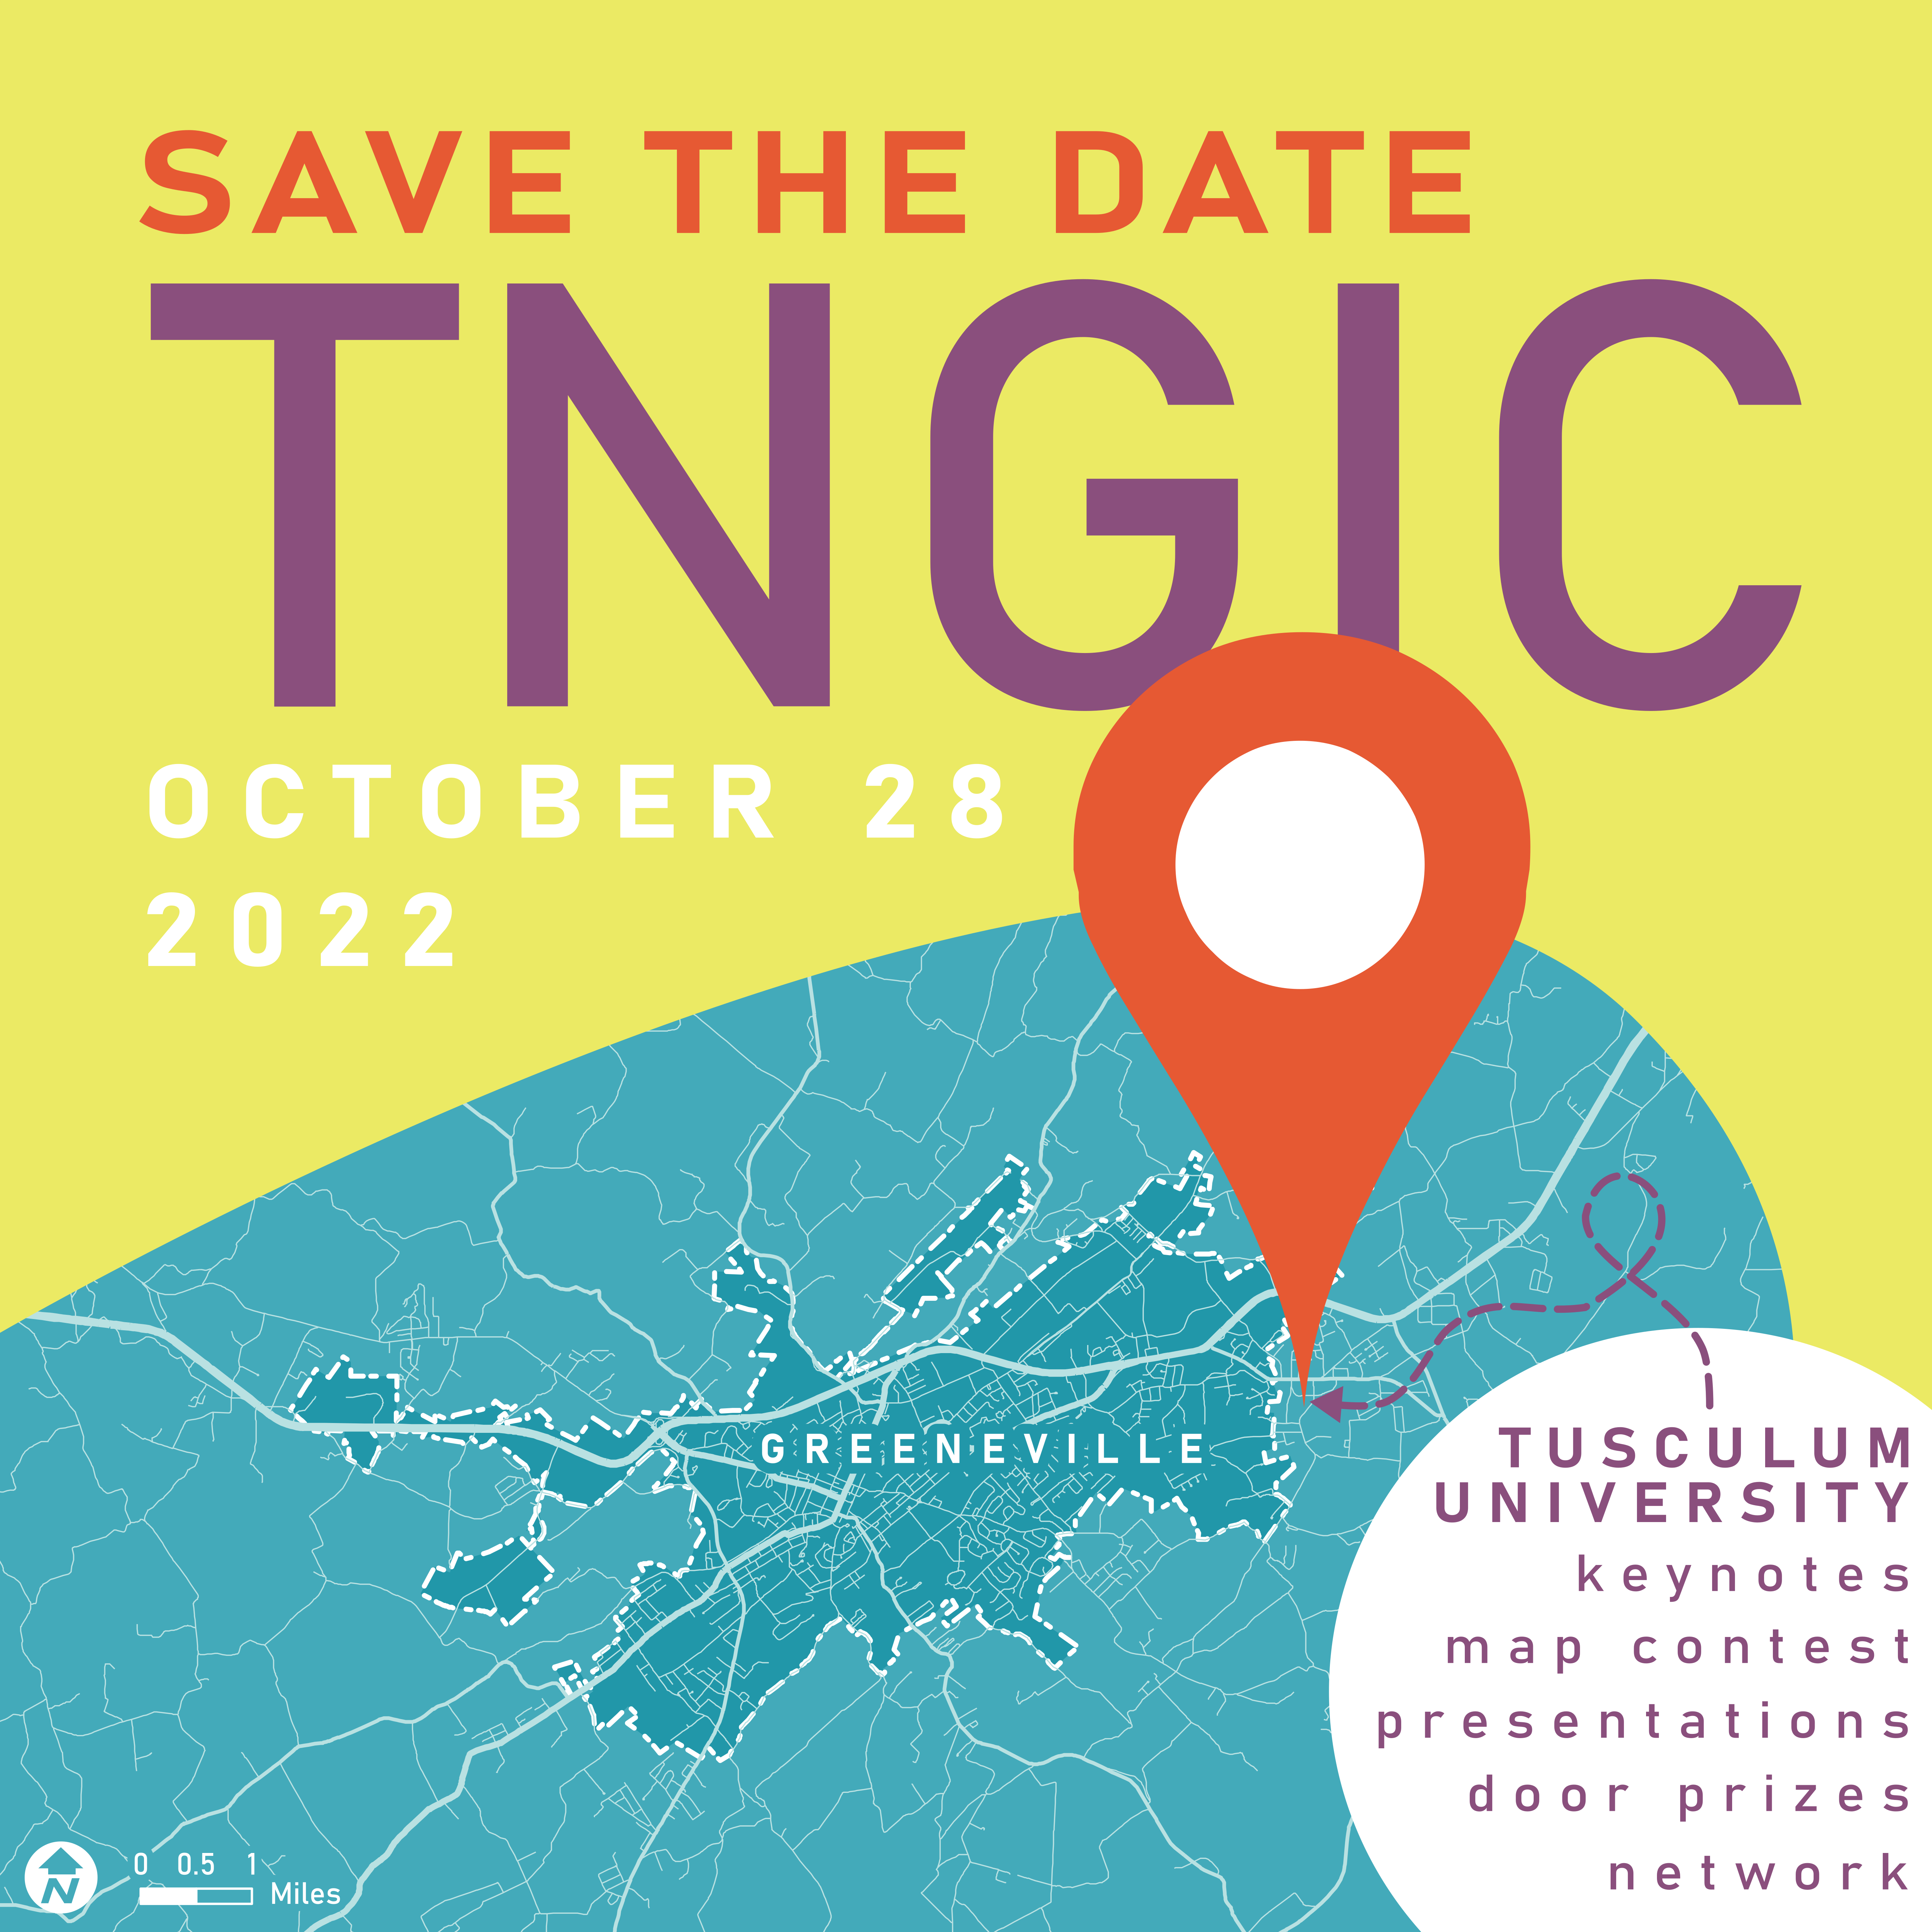 Save the date for the TNGIC East Fall Forum being held on Friday October 28, 2022 at Tusculum University.